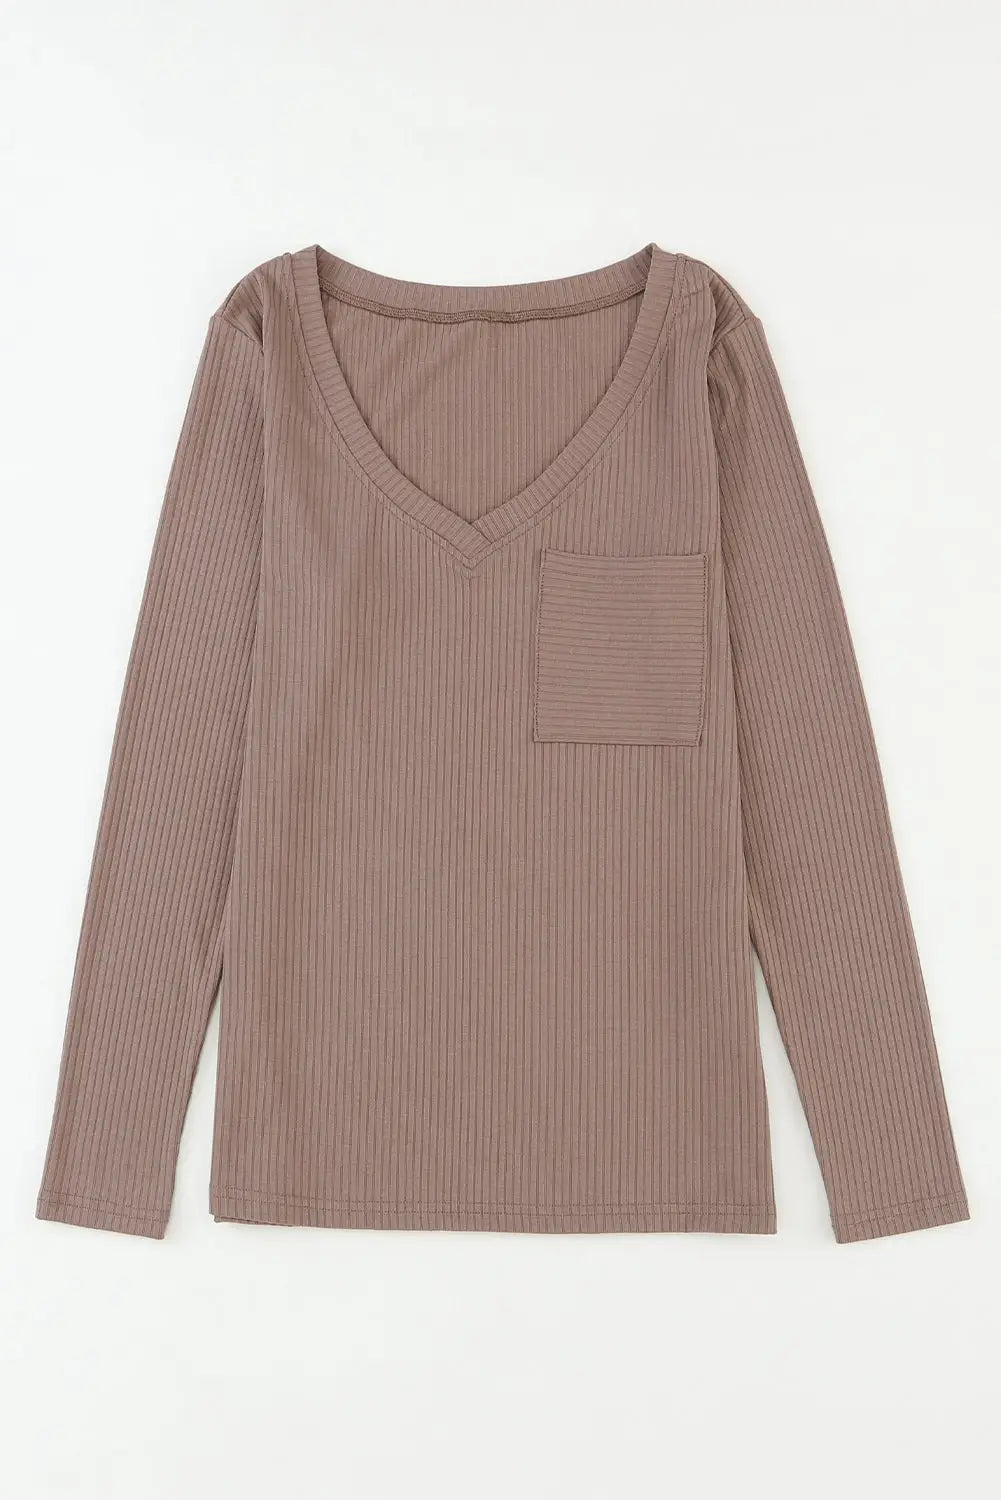 Khaki ribbed knit patched chest pocket v neck top - long sleeve tops